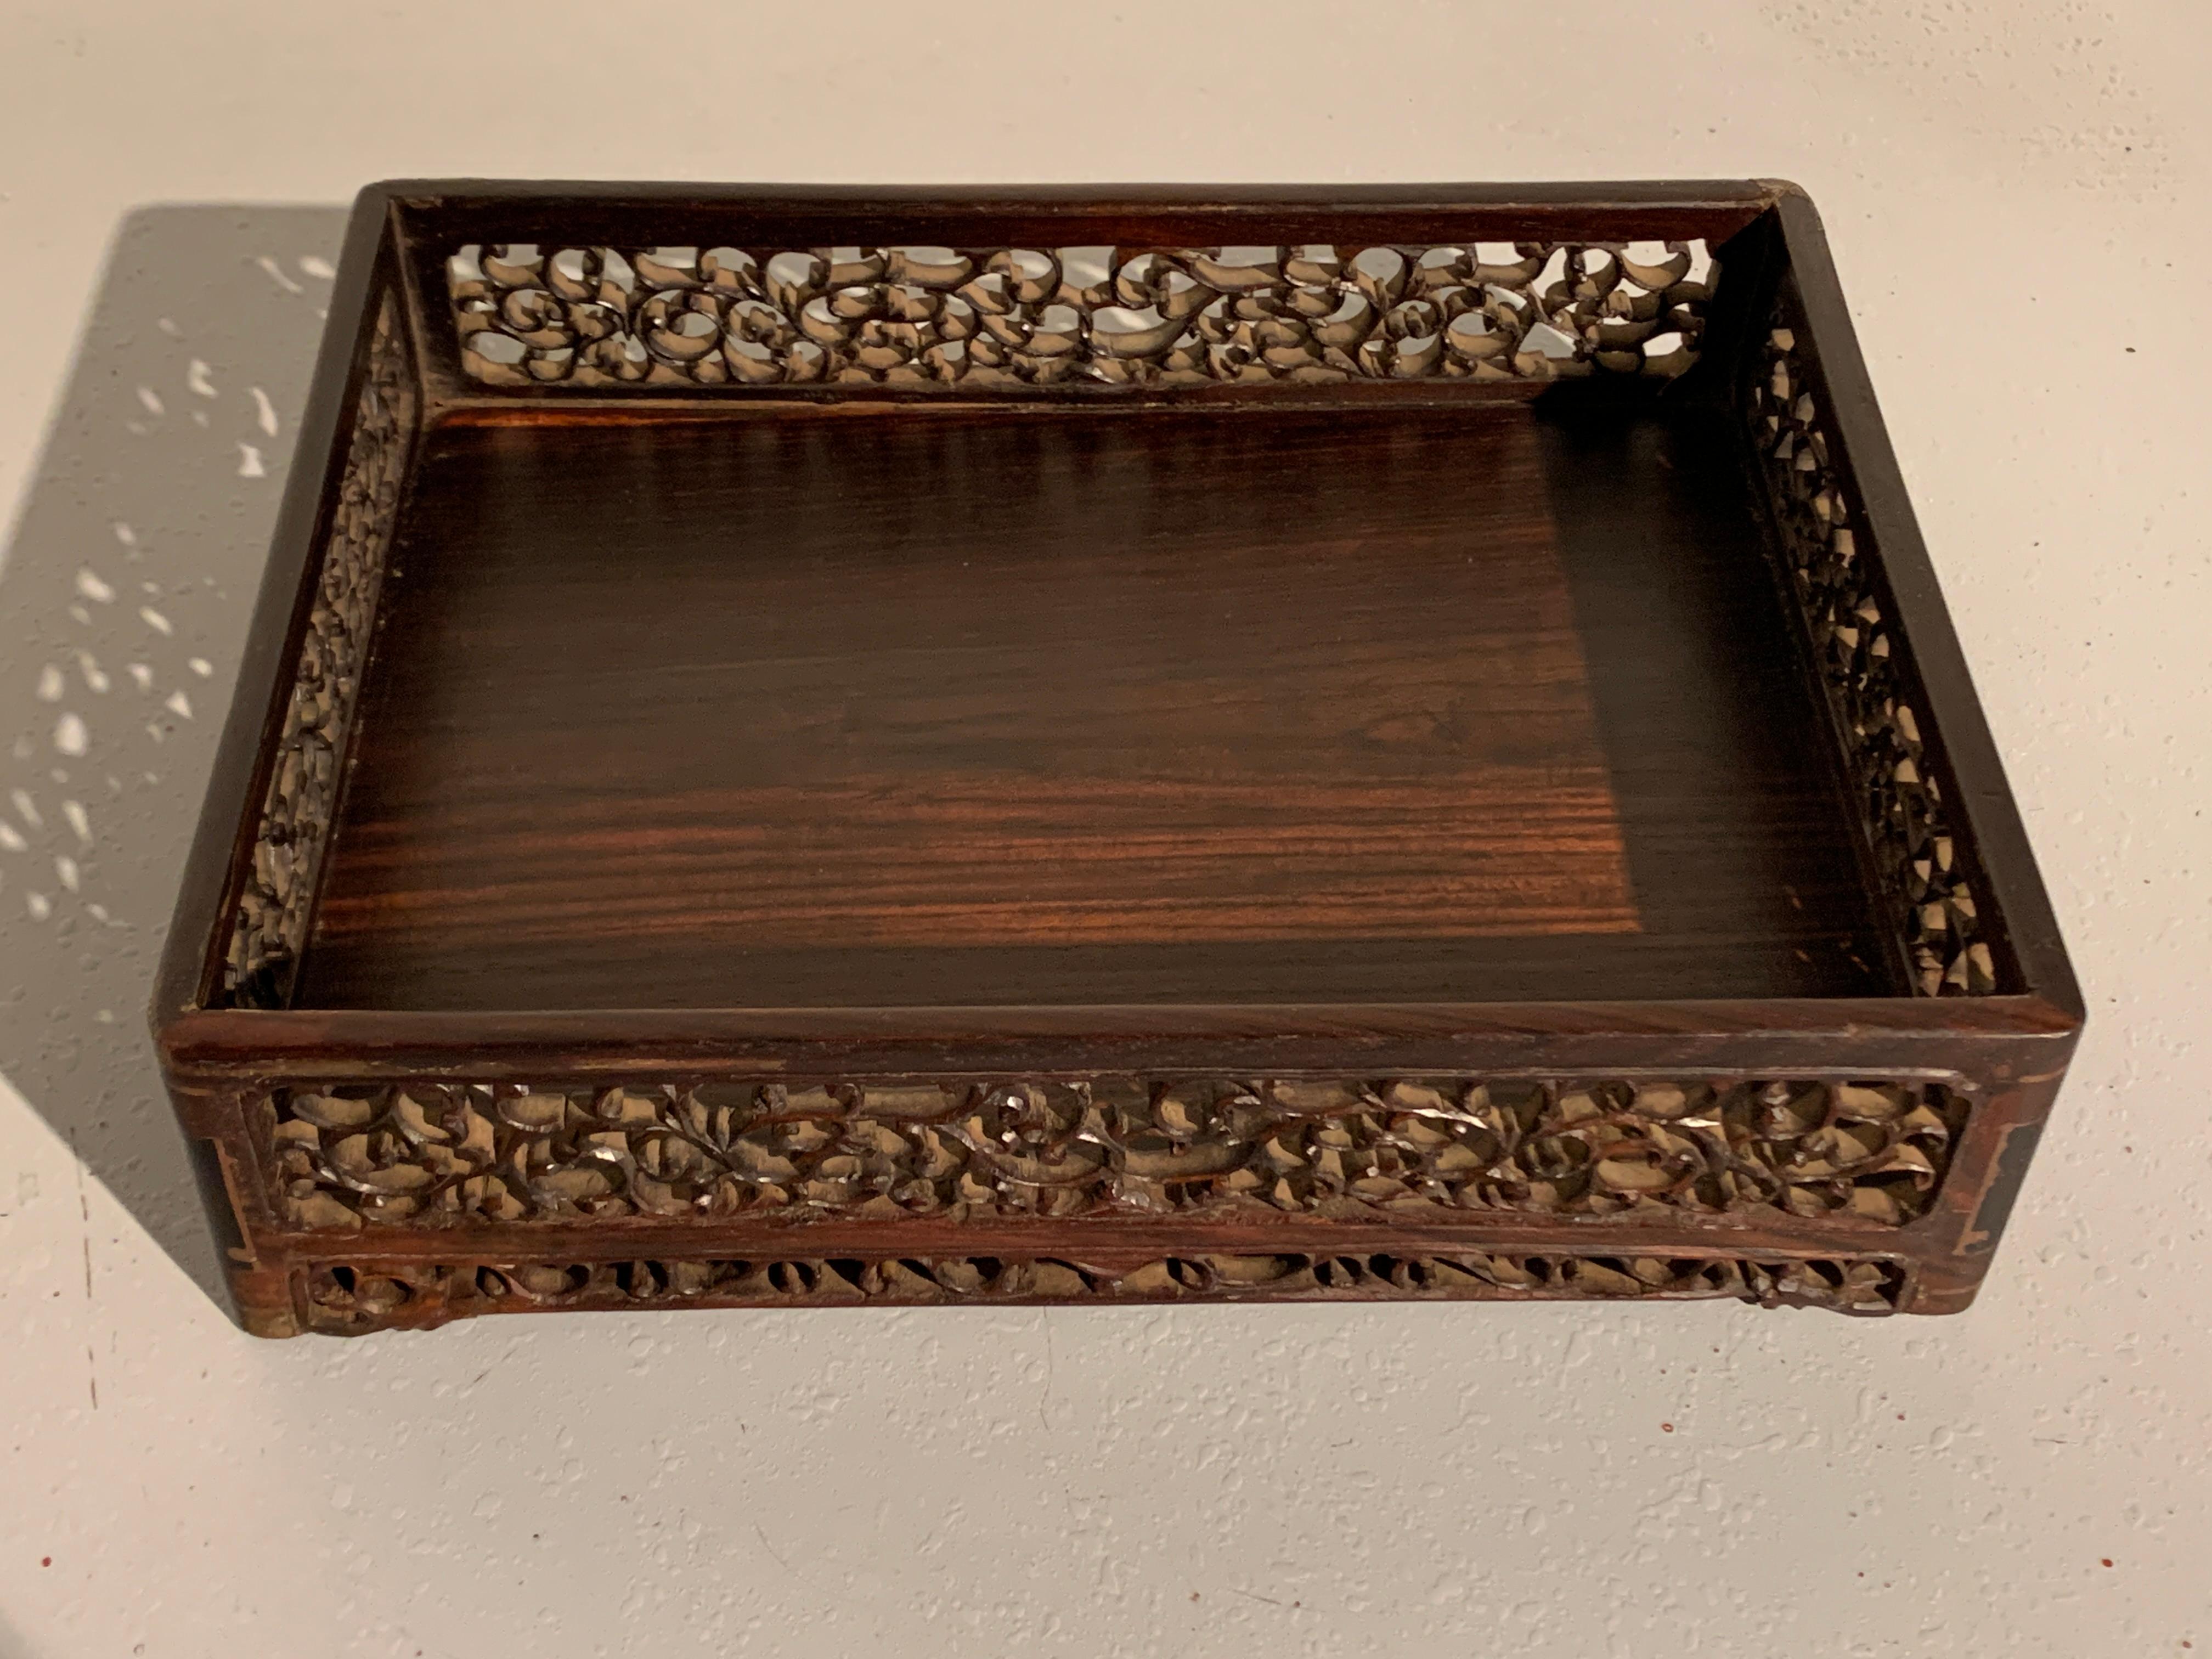 A sophisticated Chinese carved and pierced hardwood scholar's tray, Qing Dynasty, 19th century, China. 

The tray of rectangular form with high sides and rounded corners. The sides of framed floating panels delicately carved and pierced with an